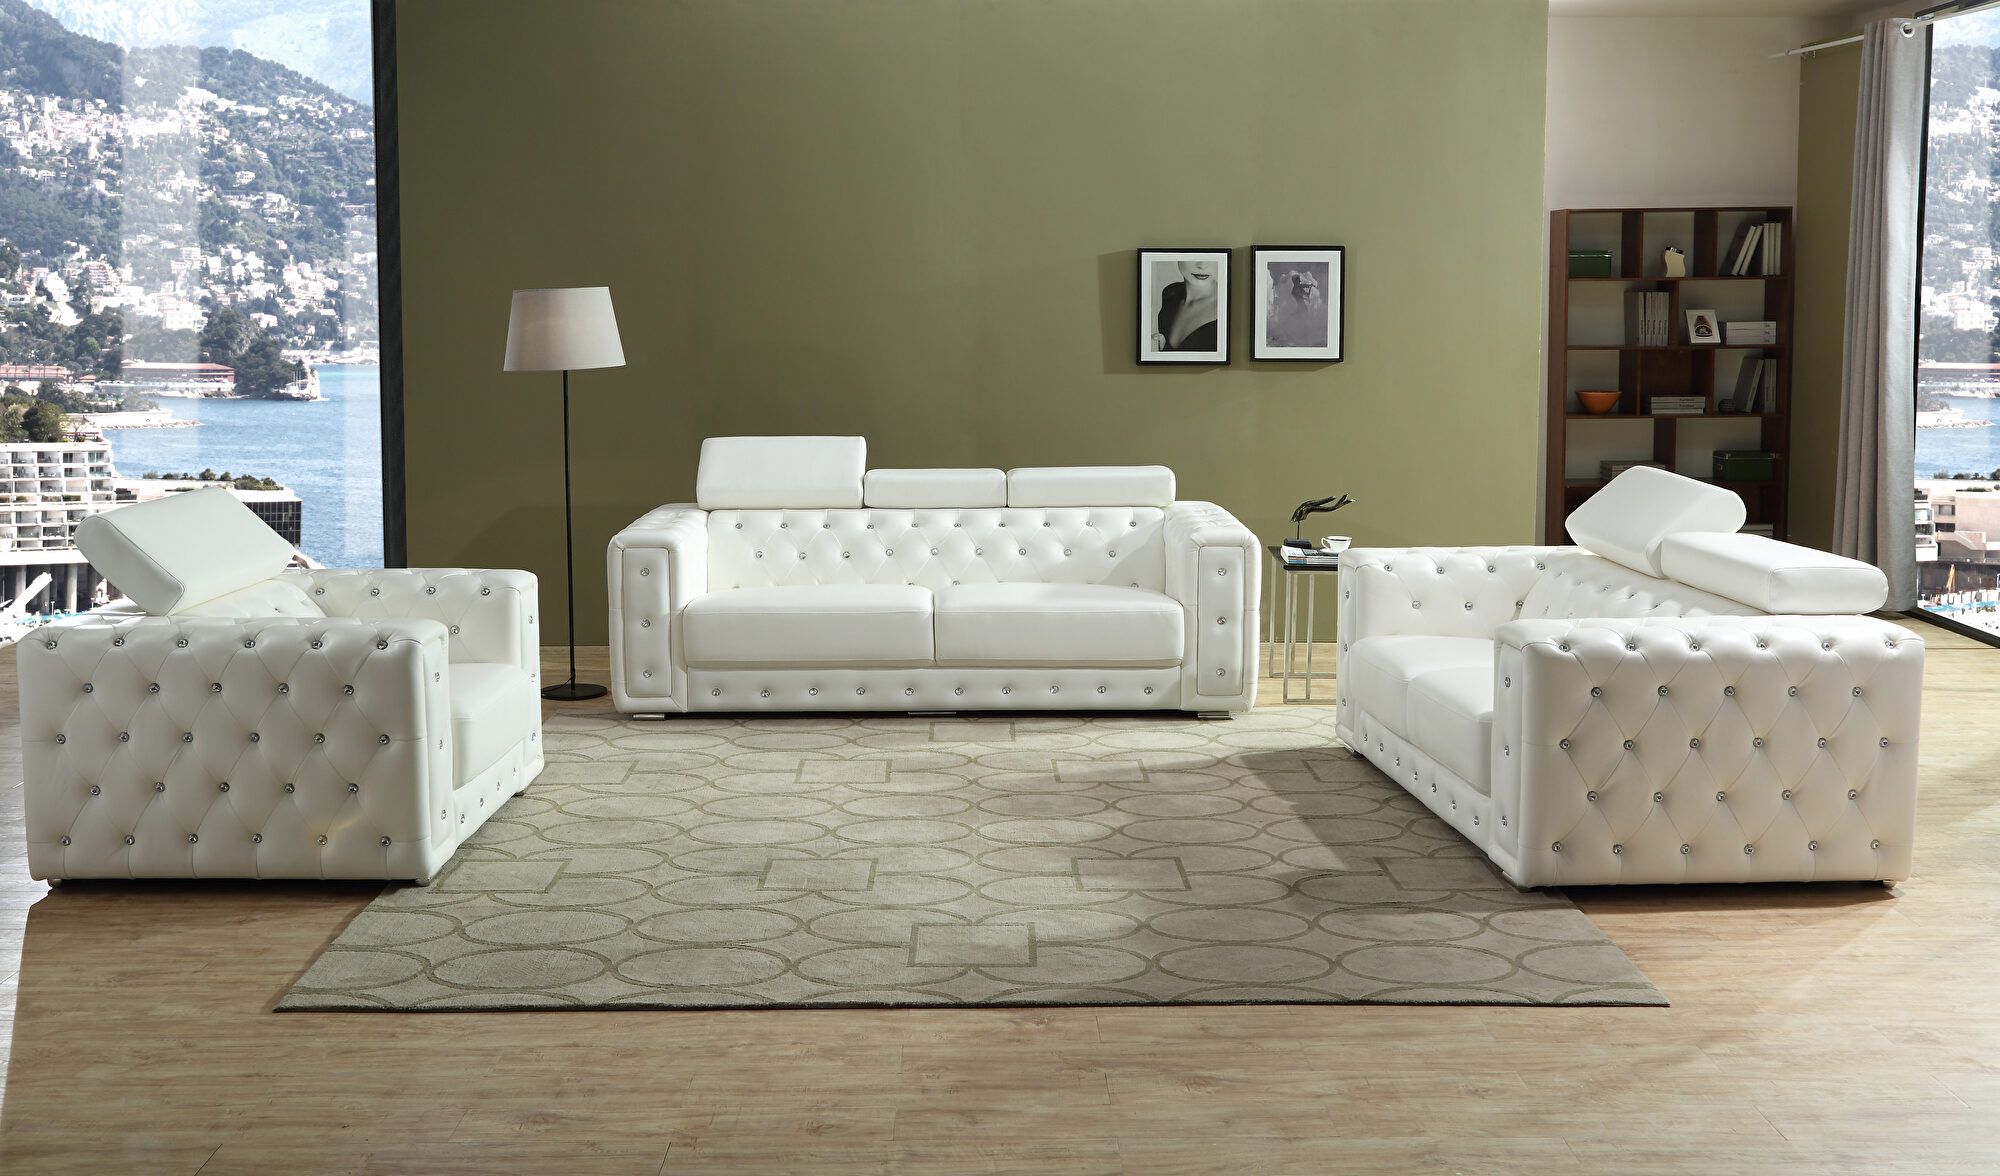 Cosmos Charlise White Sofa 3035whcha | Comfyco Throughout Faux Leather Sofas (View 15 of 15)